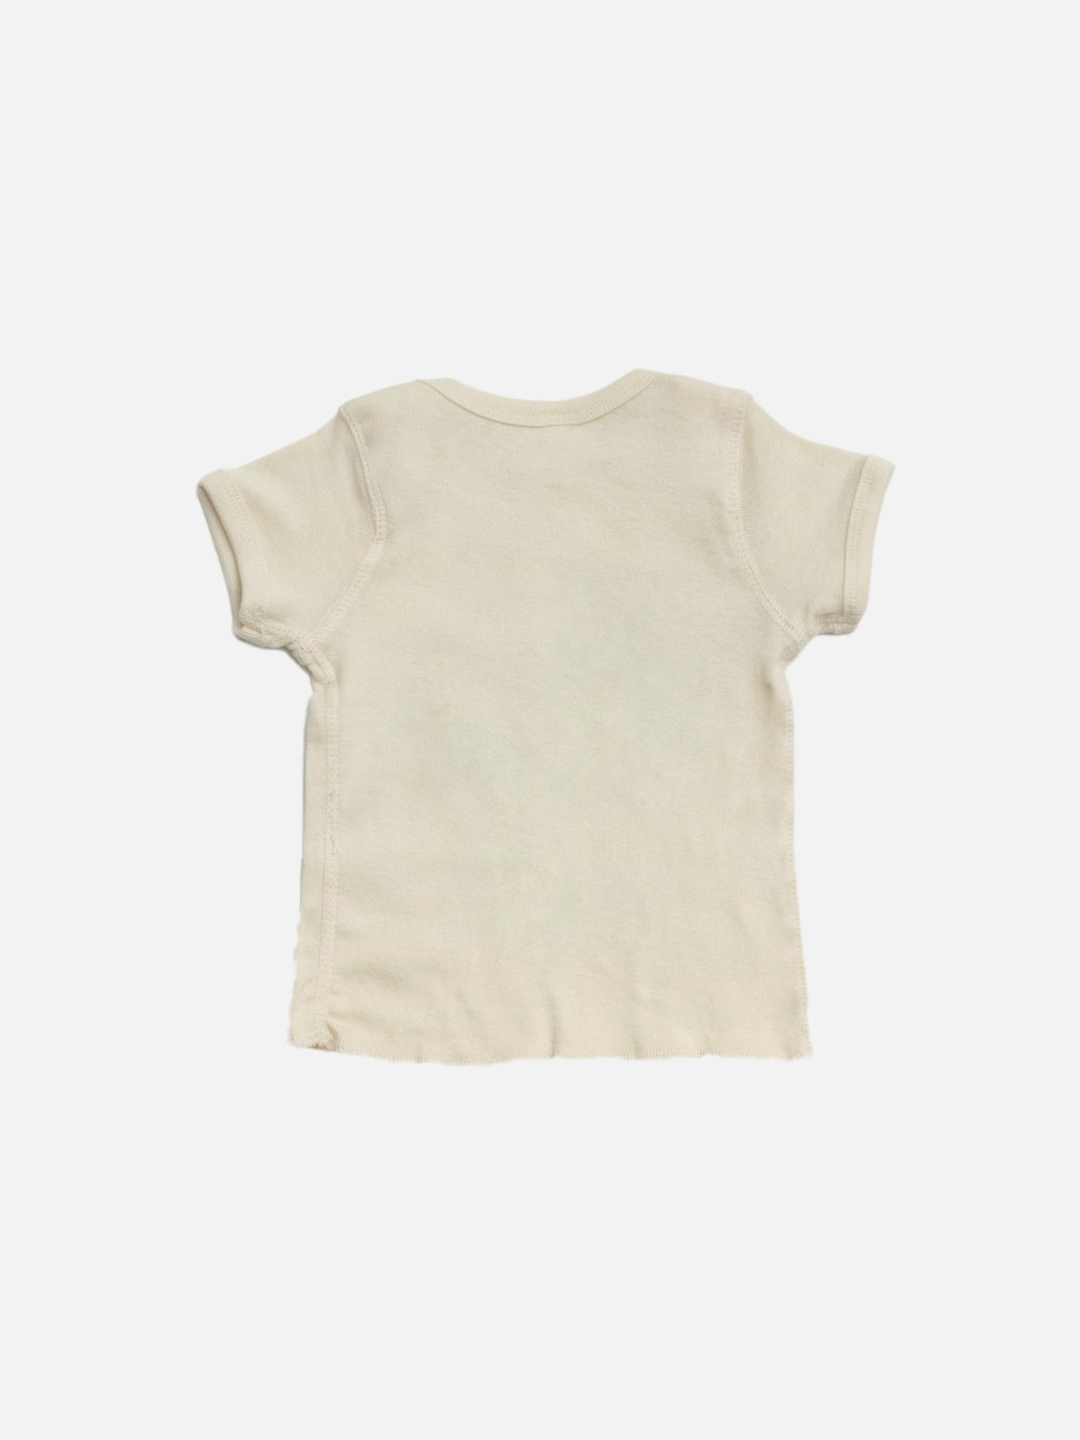 A cream colored baby tee, back view